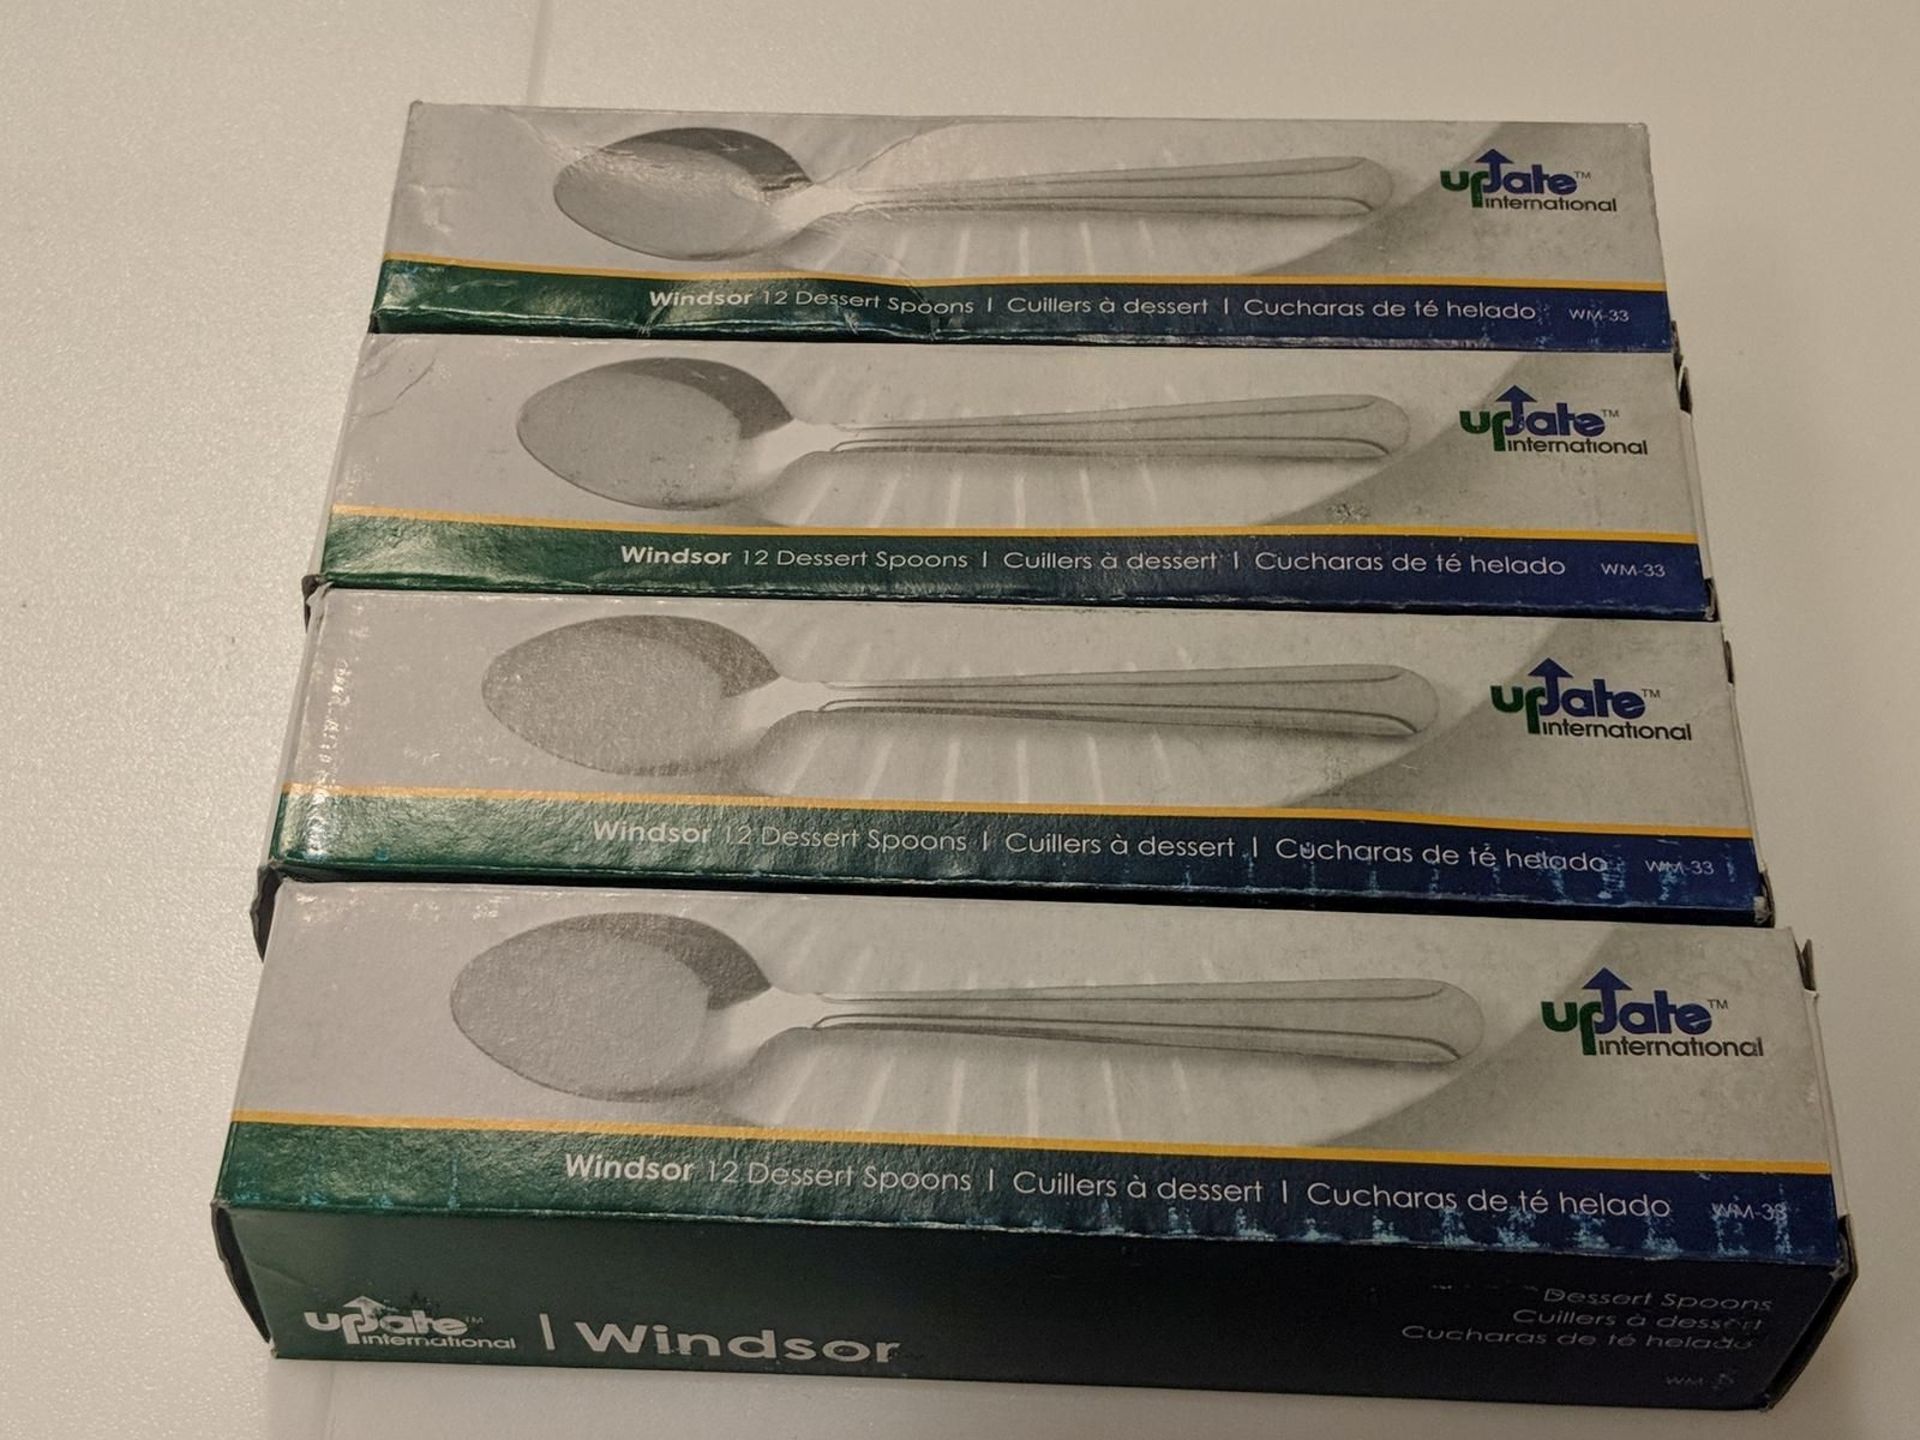 Stainless Dessert Spoons, Windsor Series - Lot of 48 - Image 3 of 3